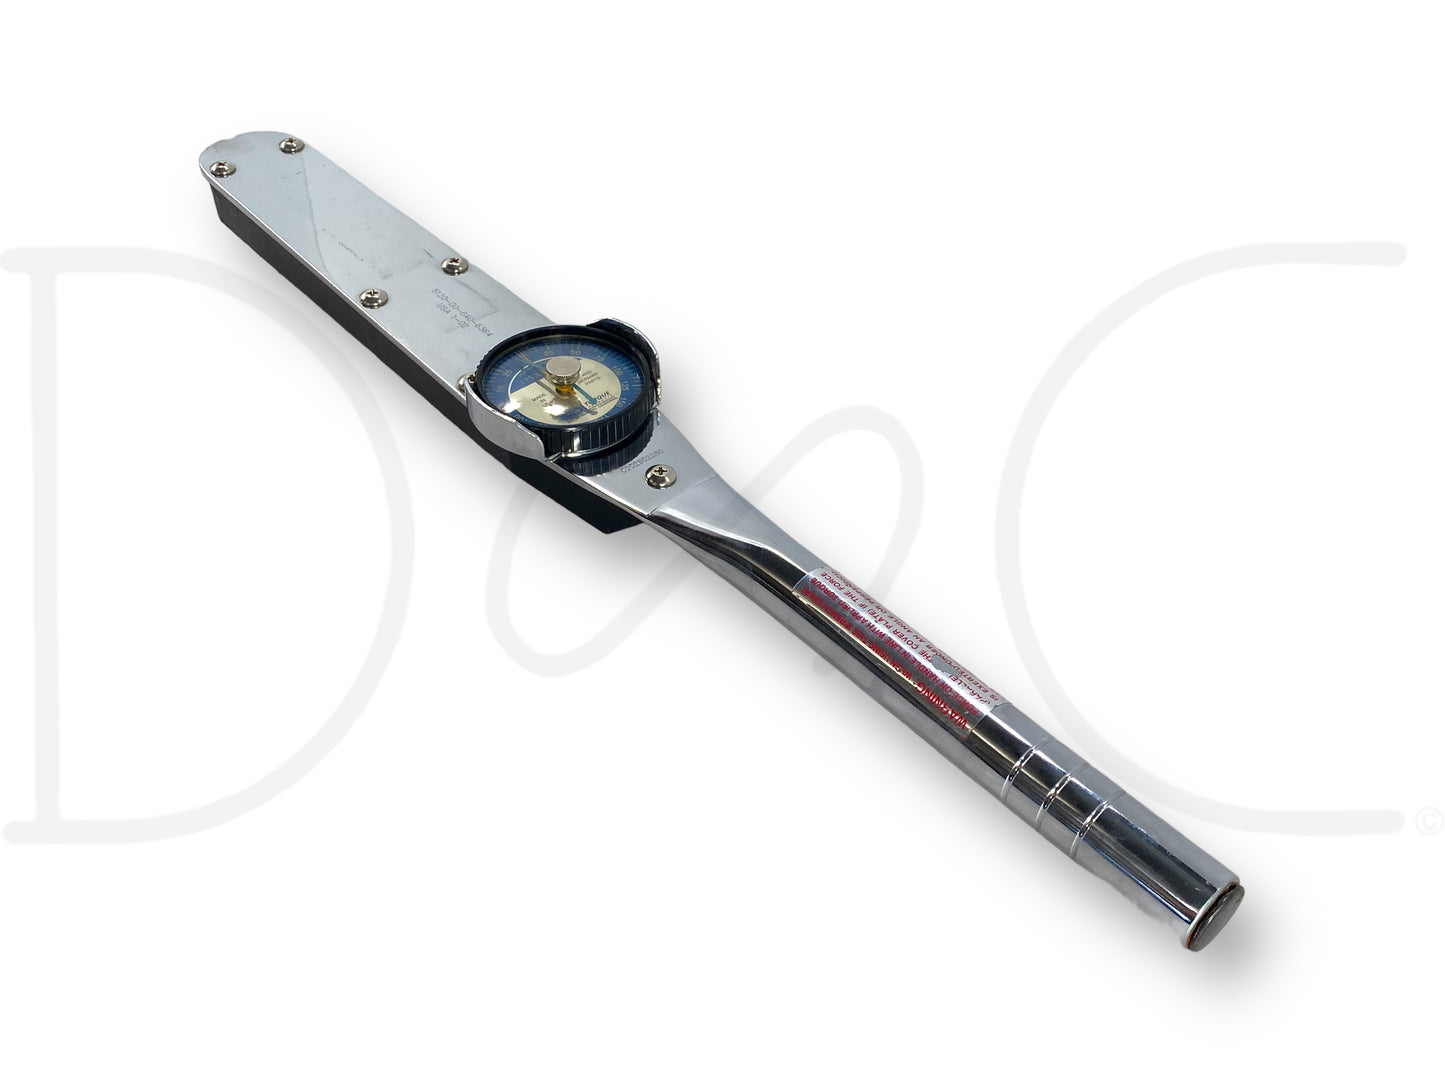 CDi 1753Ldfnss 1/2" Drive Dial Torque Wrench 175 Ft Lbs